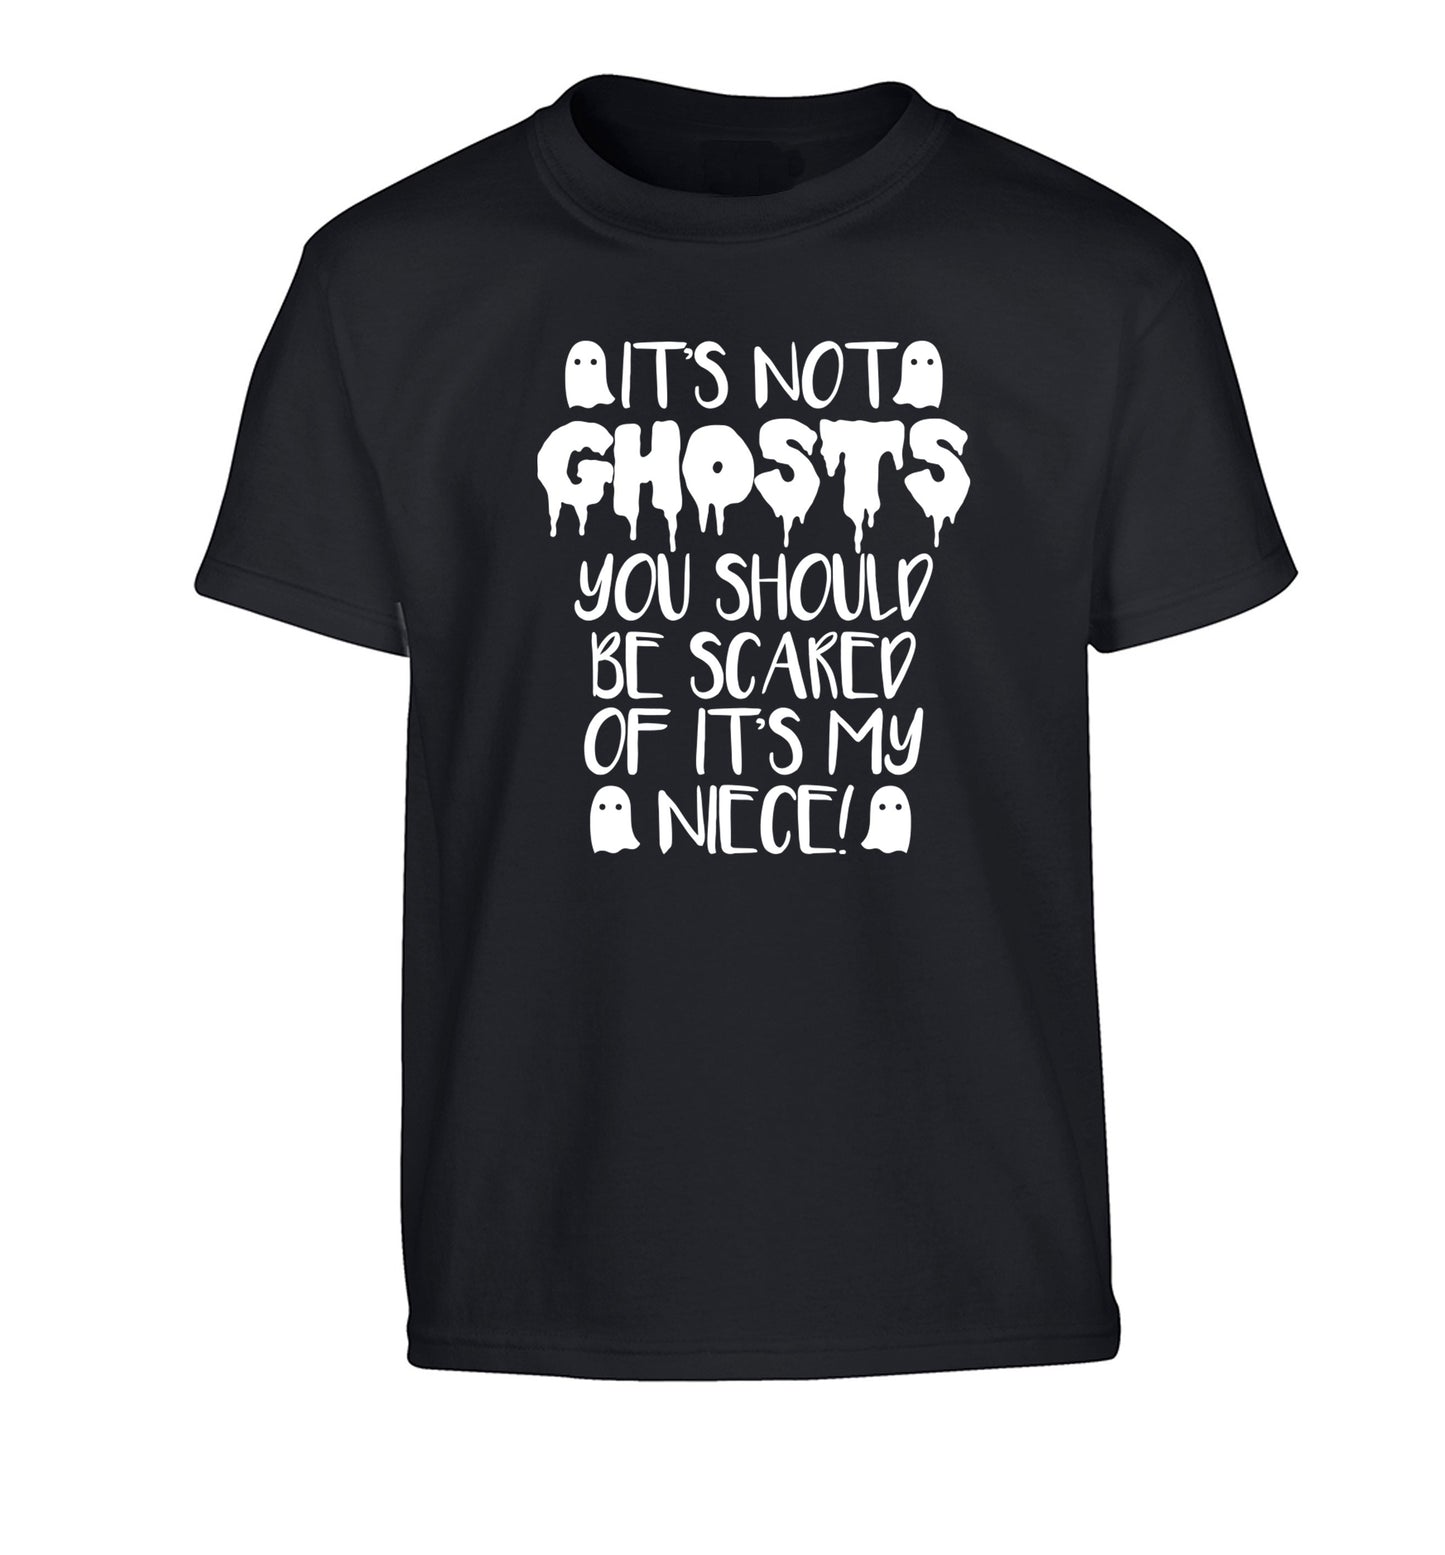 It's not ghosts you should be scared of it's my niece! Children's black Tshirt 12-14 Years